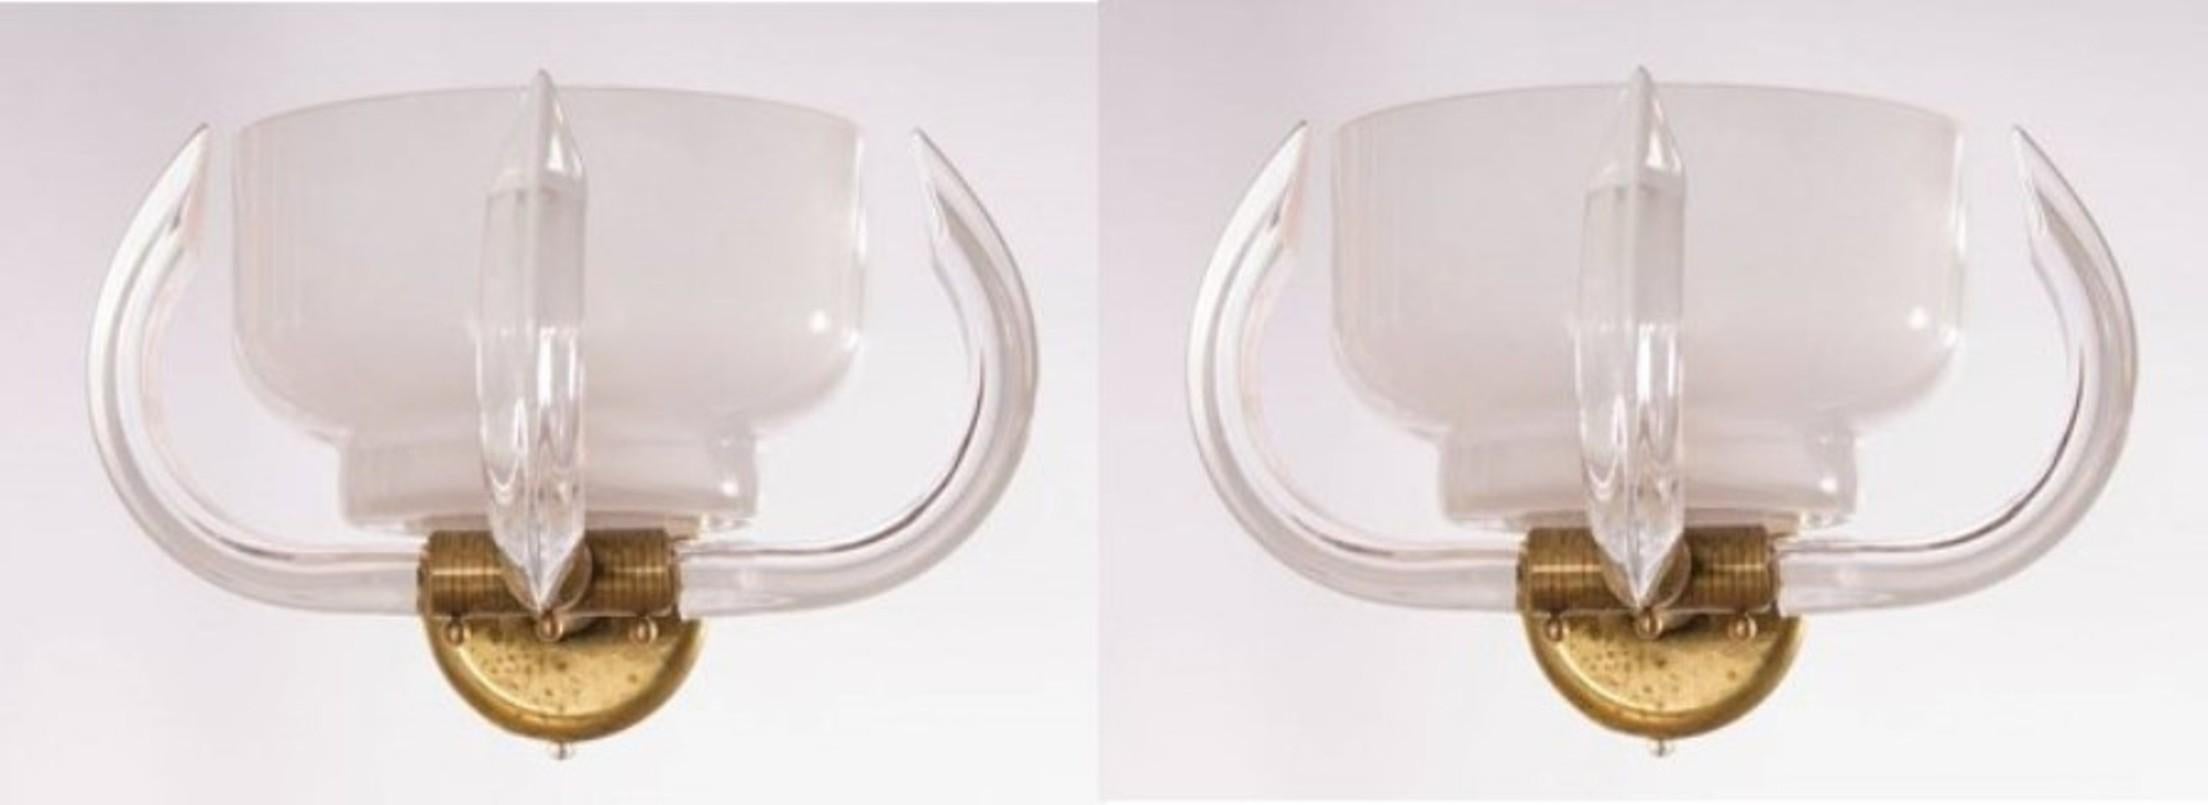 Massive pair of sconces milk color with clear horns in blown Murano glass 1960s Italy
The work of art is constituted of a main huge white bowl in milk color, surrendered by three triedro curved horns, joined together by a massive original brass